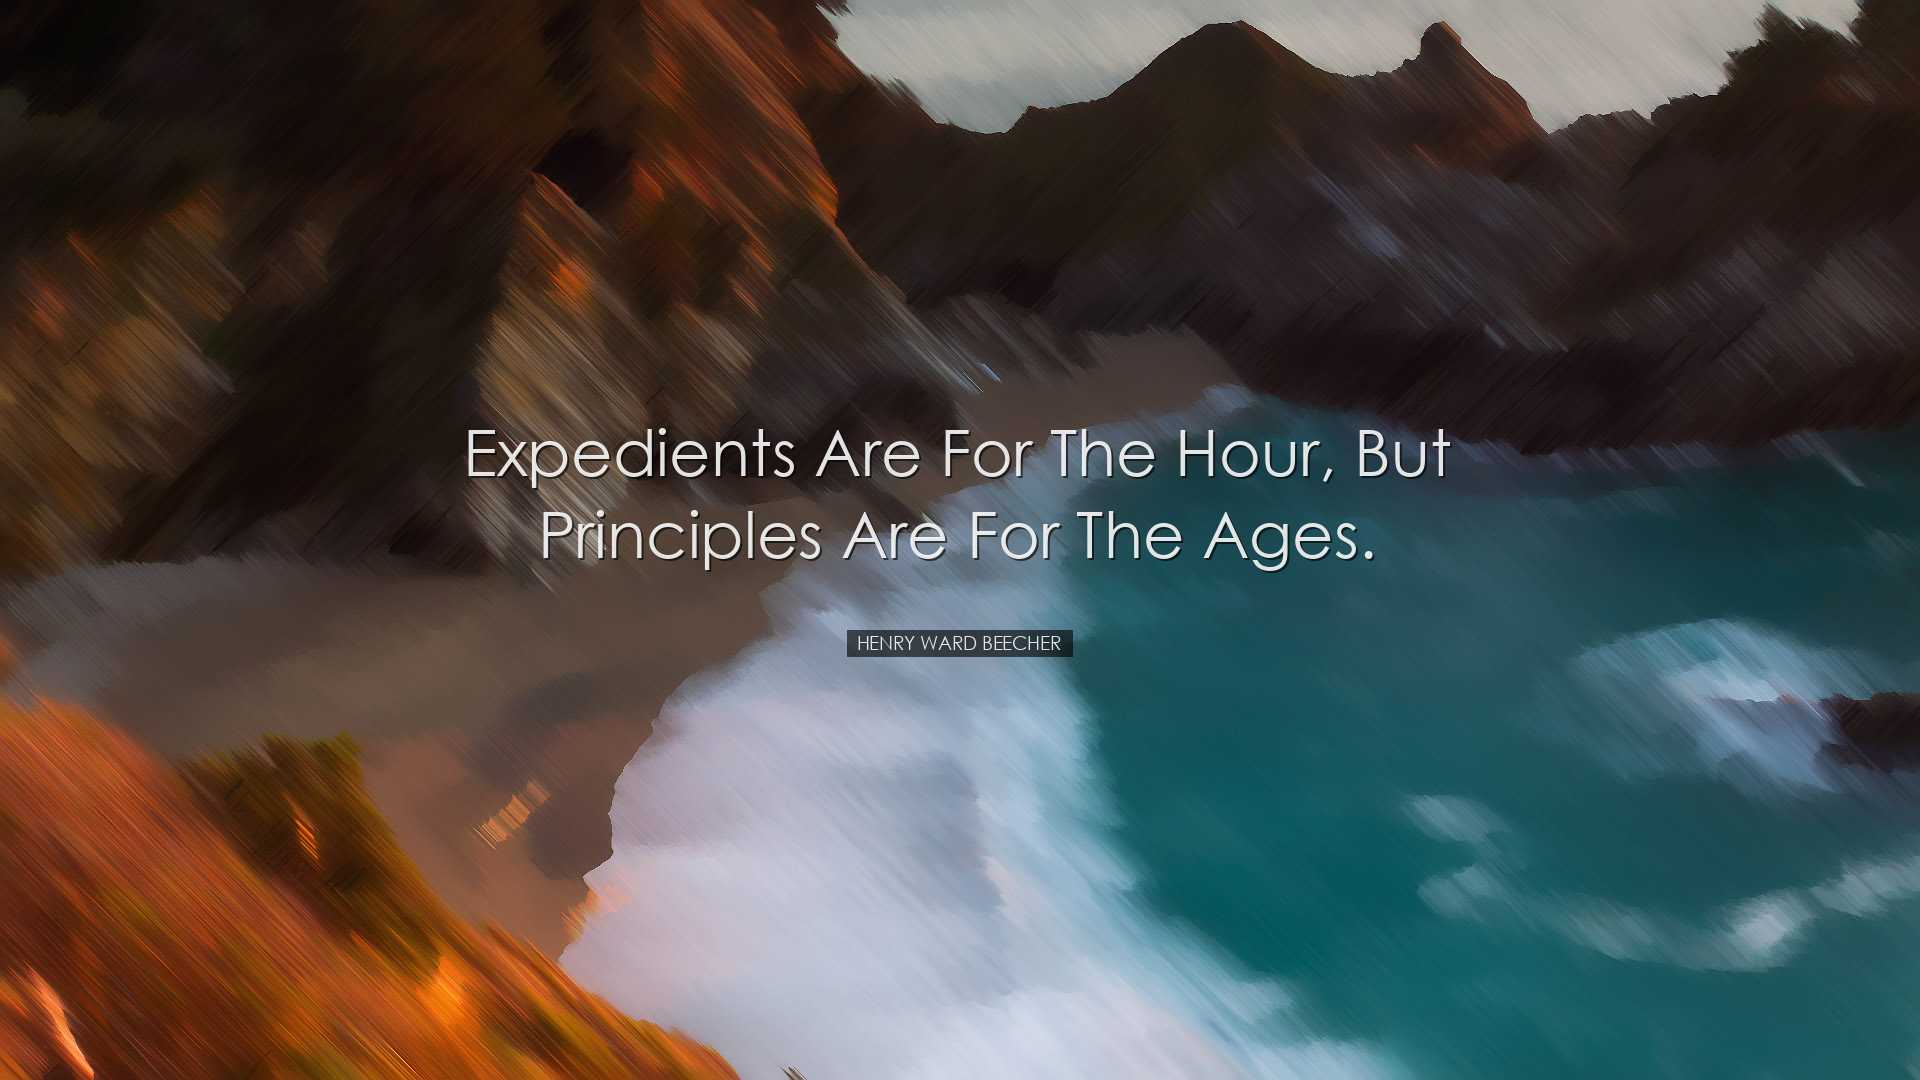 Expedients are for the hour, but principles are for the ages. - He